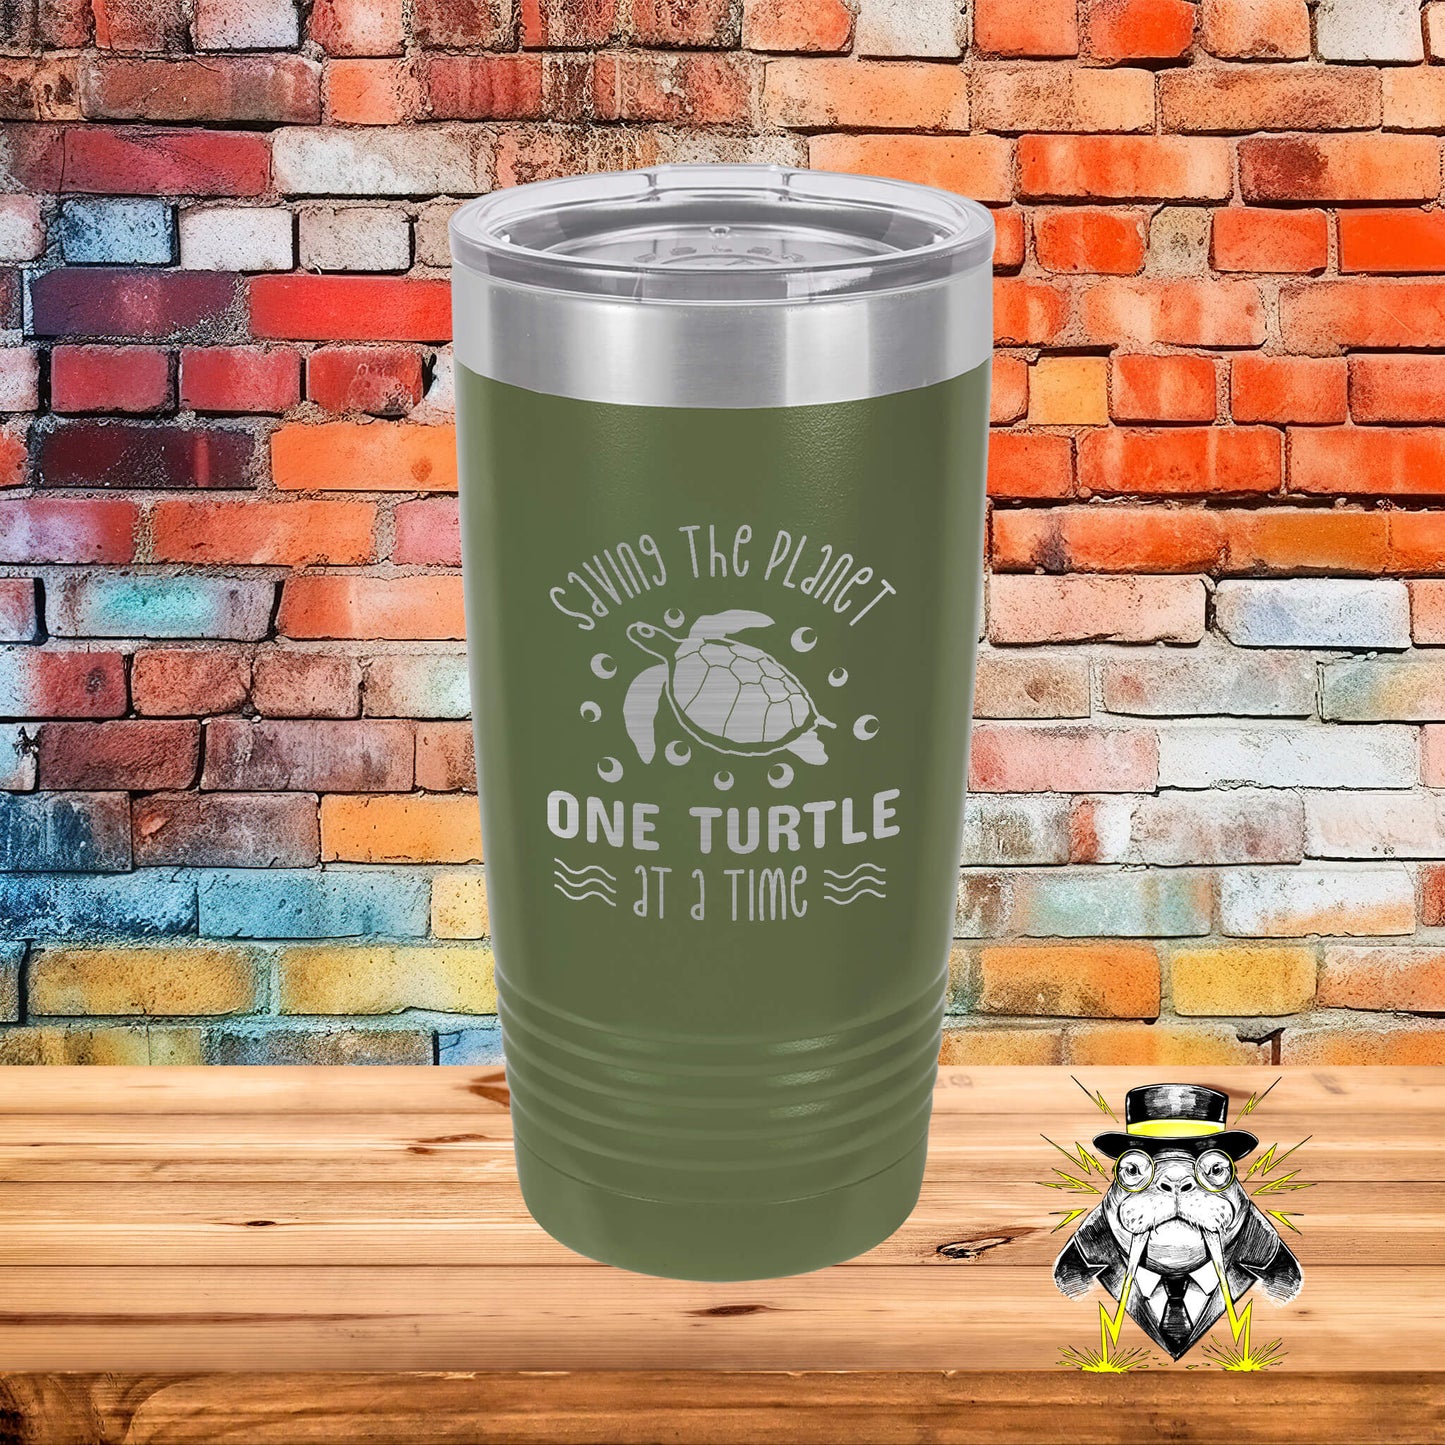 Saving the Planet One Turtle at a Time Engraved Tumbler